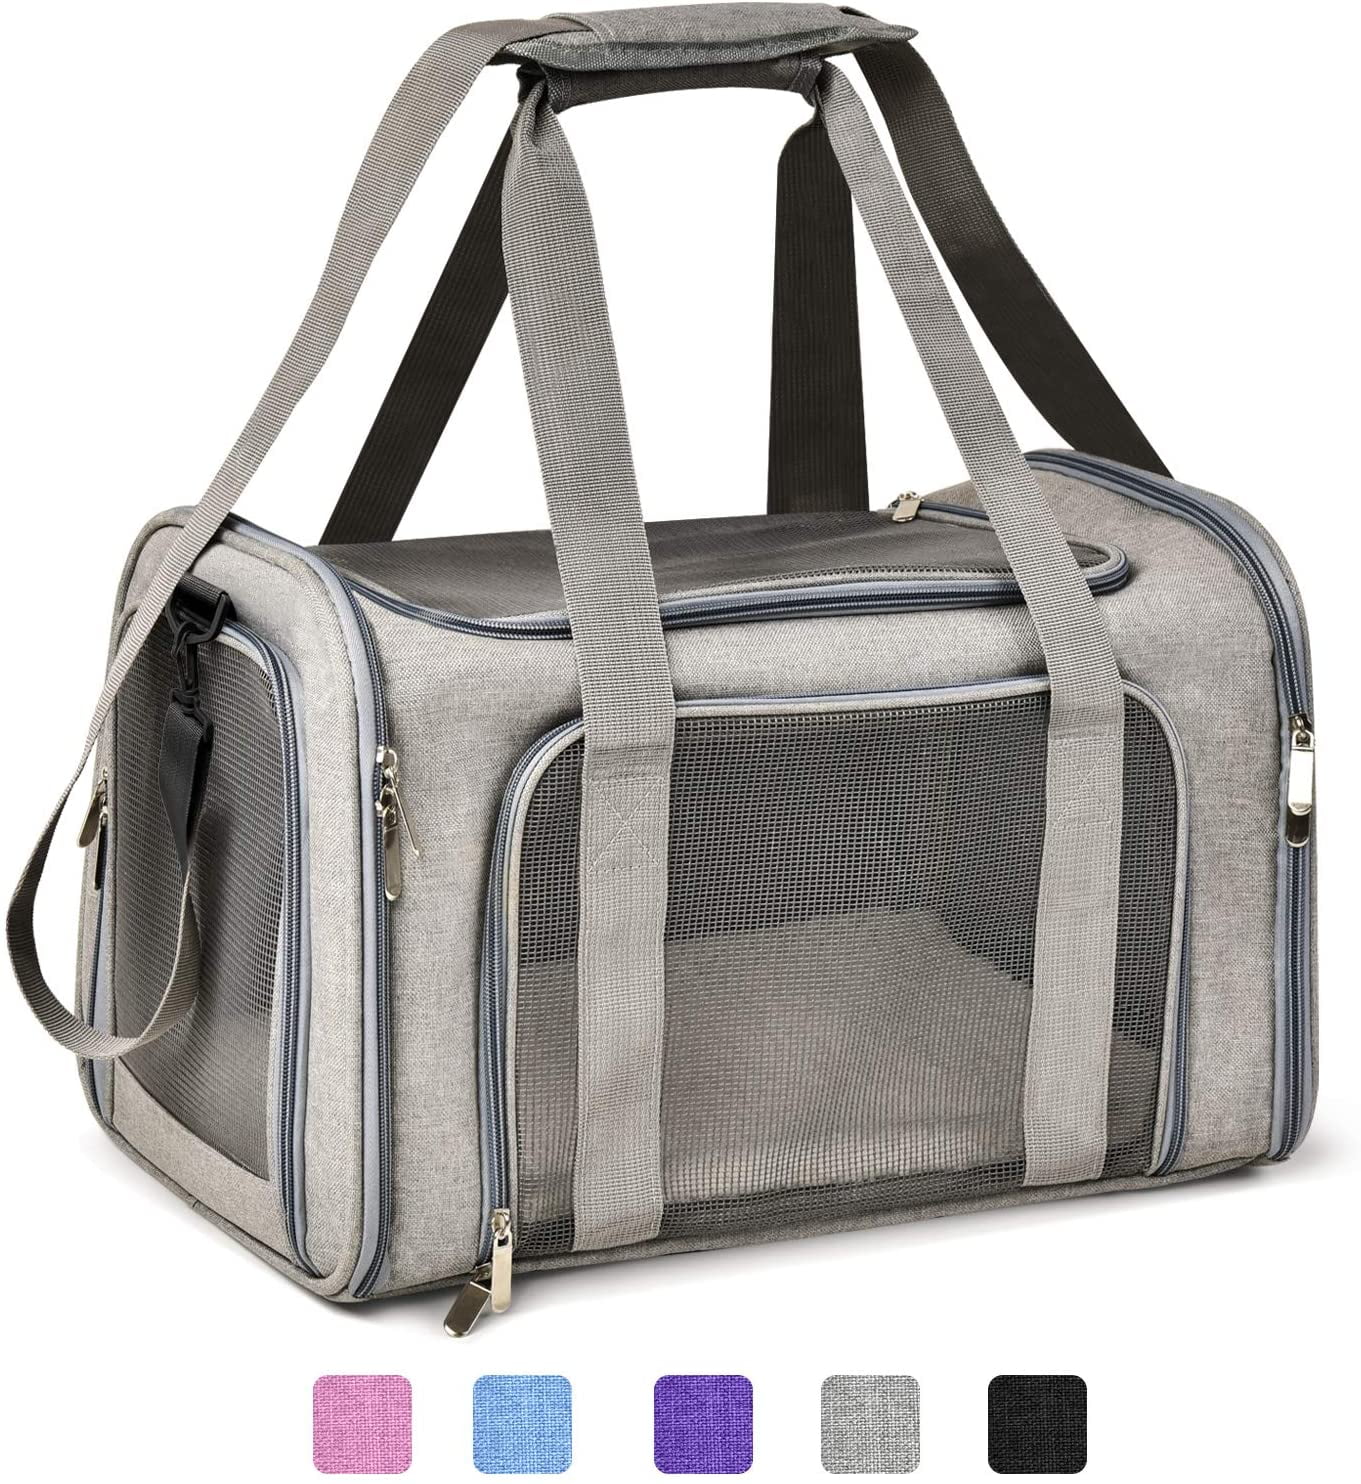 Siivton Airline Approved Foldable Pet Carrier - Sears Marketplace